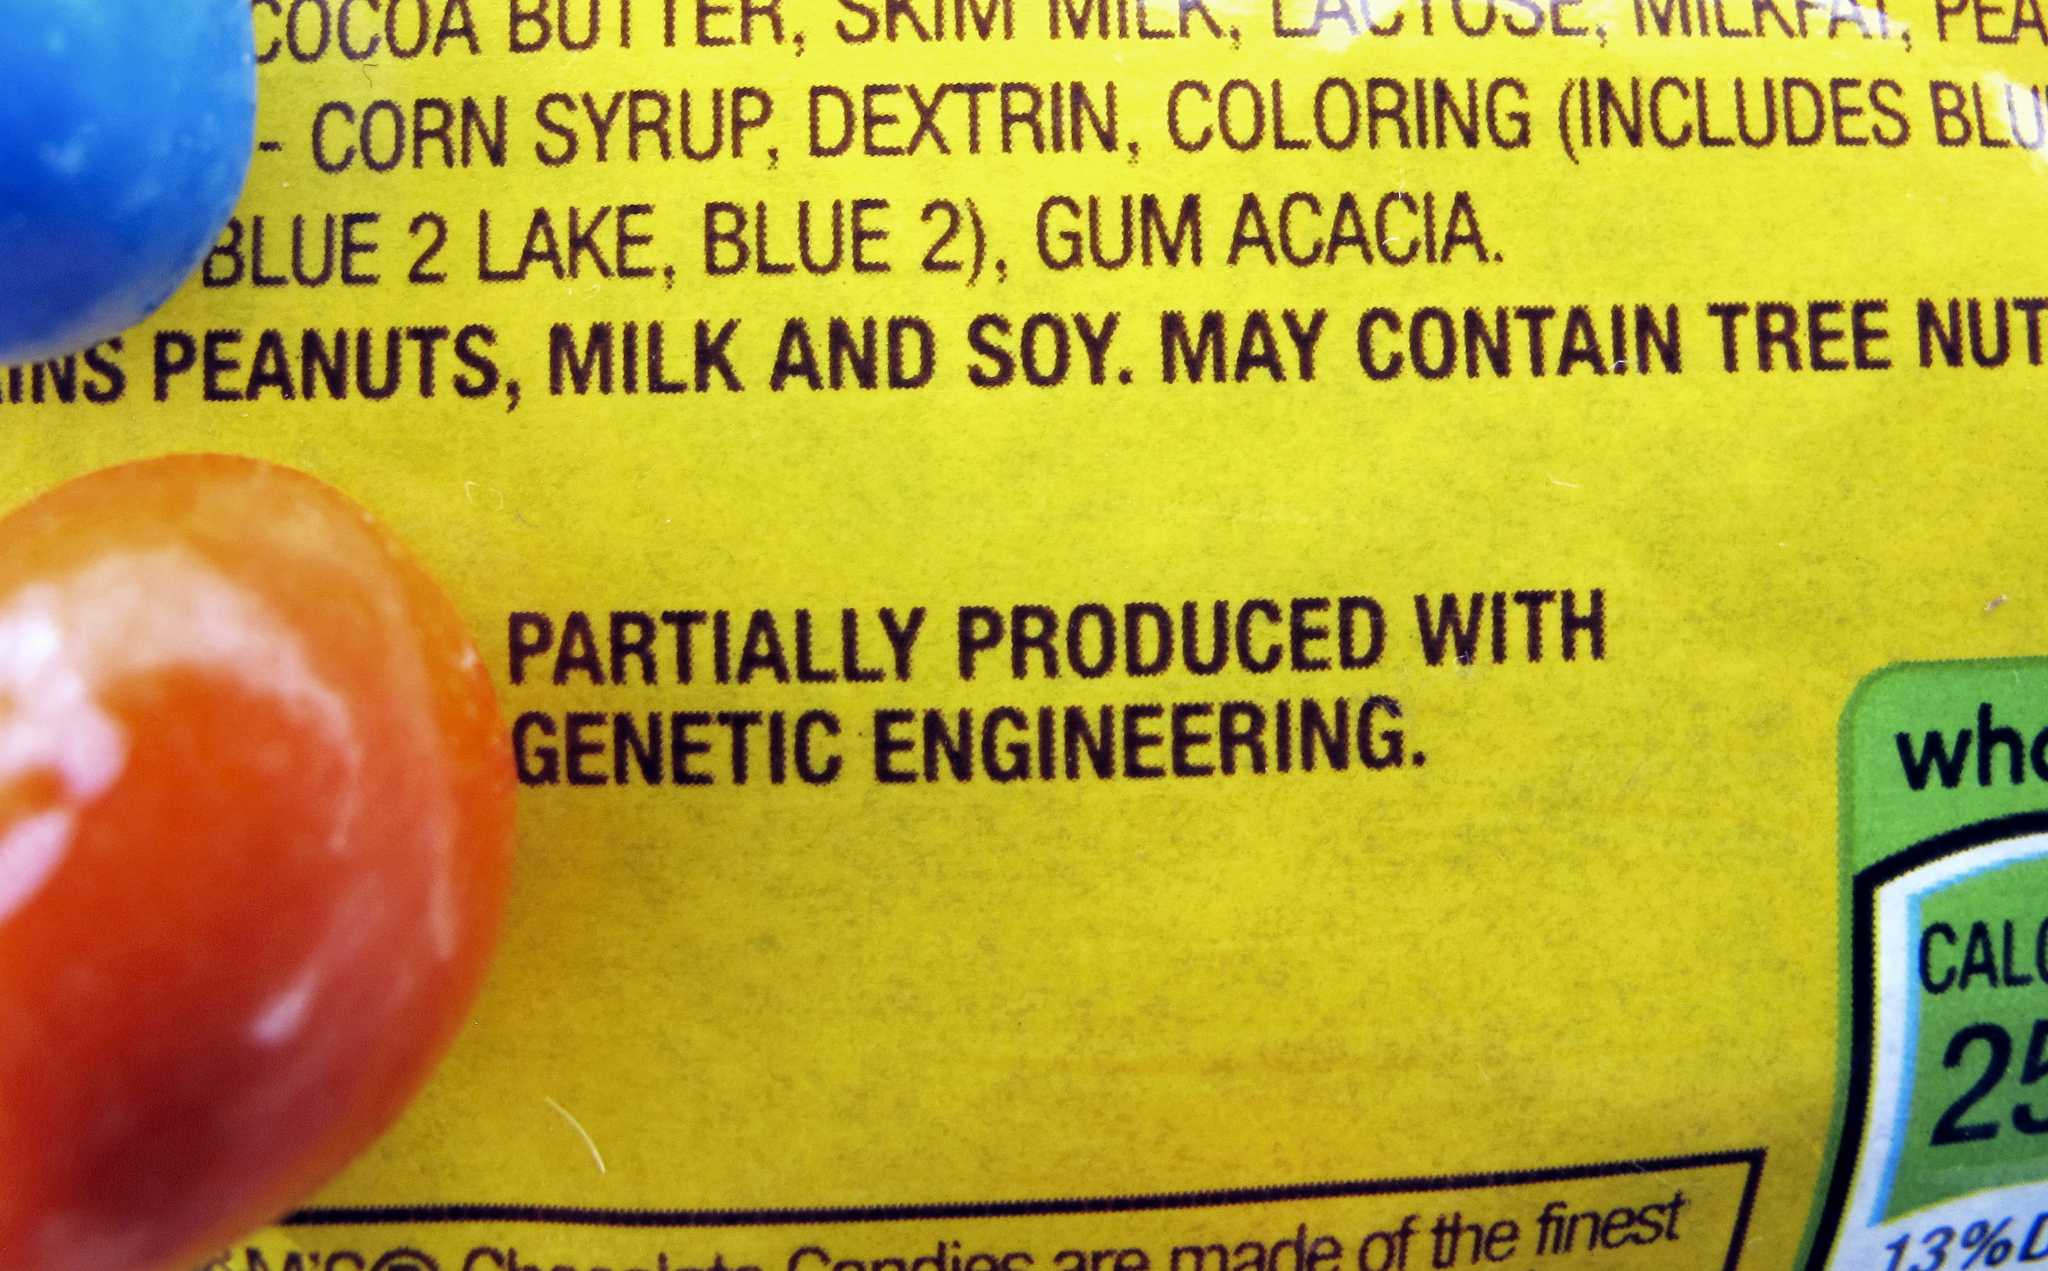 What is partially produced with genetic engineering in peanut